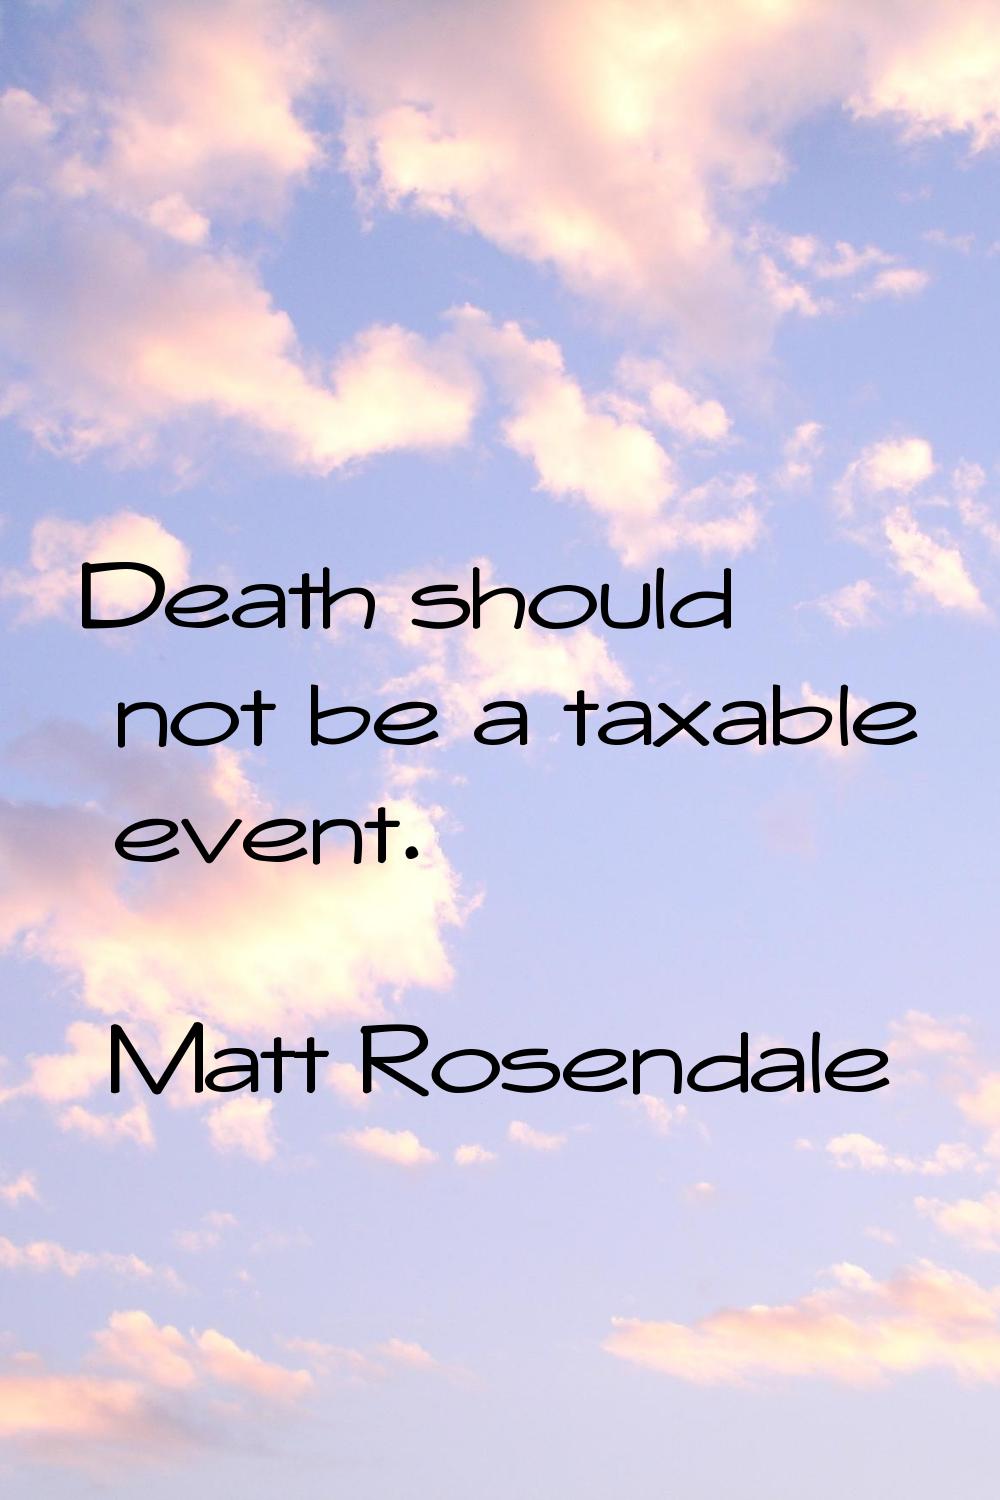 Death should not be a taxable event.